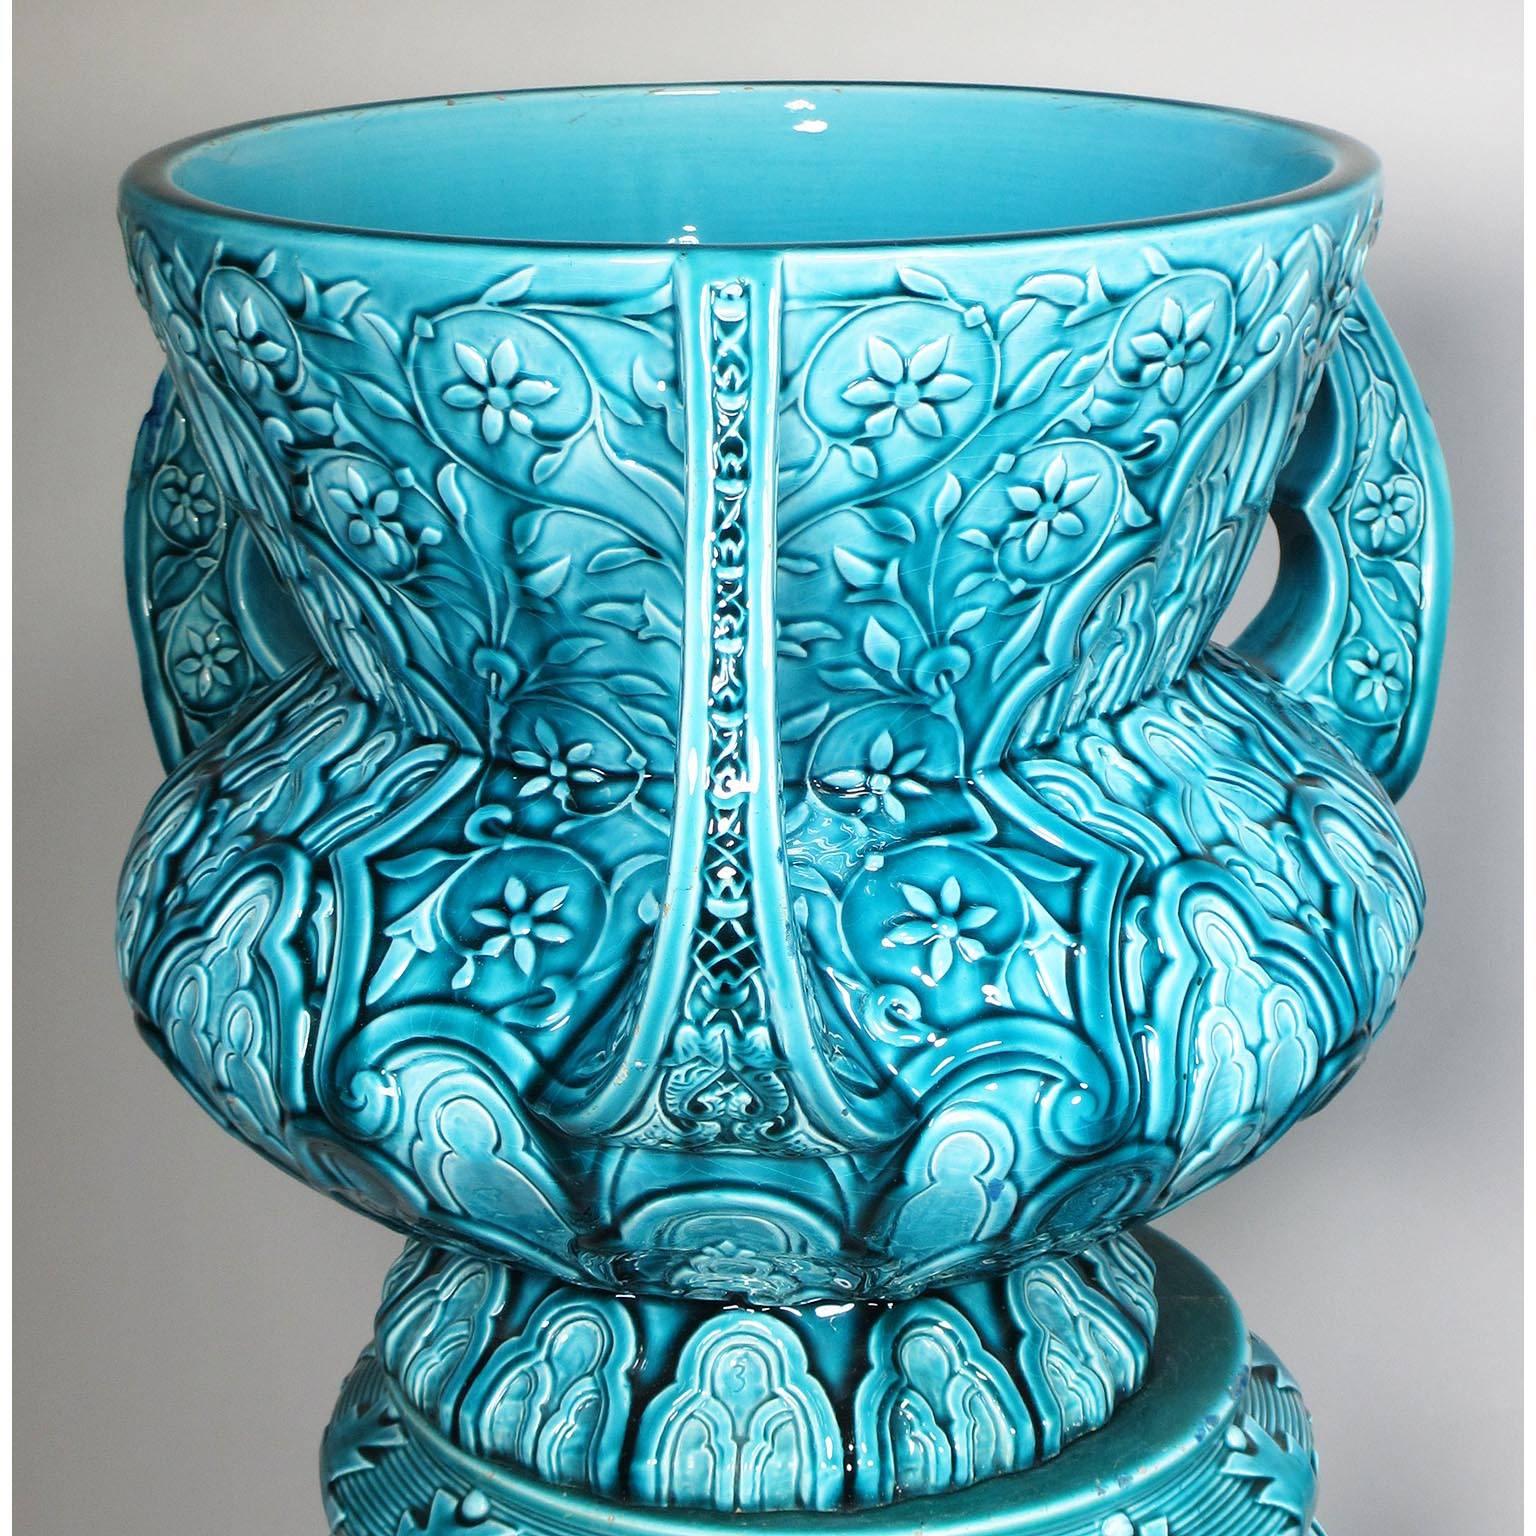 A fine pair of French 19th century Moorish style - Turquoise Glazed Pottery Jardinieres (Planters) on stands by Clément Massier (French, 1845–1917) Golfe-Juan (After 1884). The globular bowl with three upright scalloped pistol handles, molded all